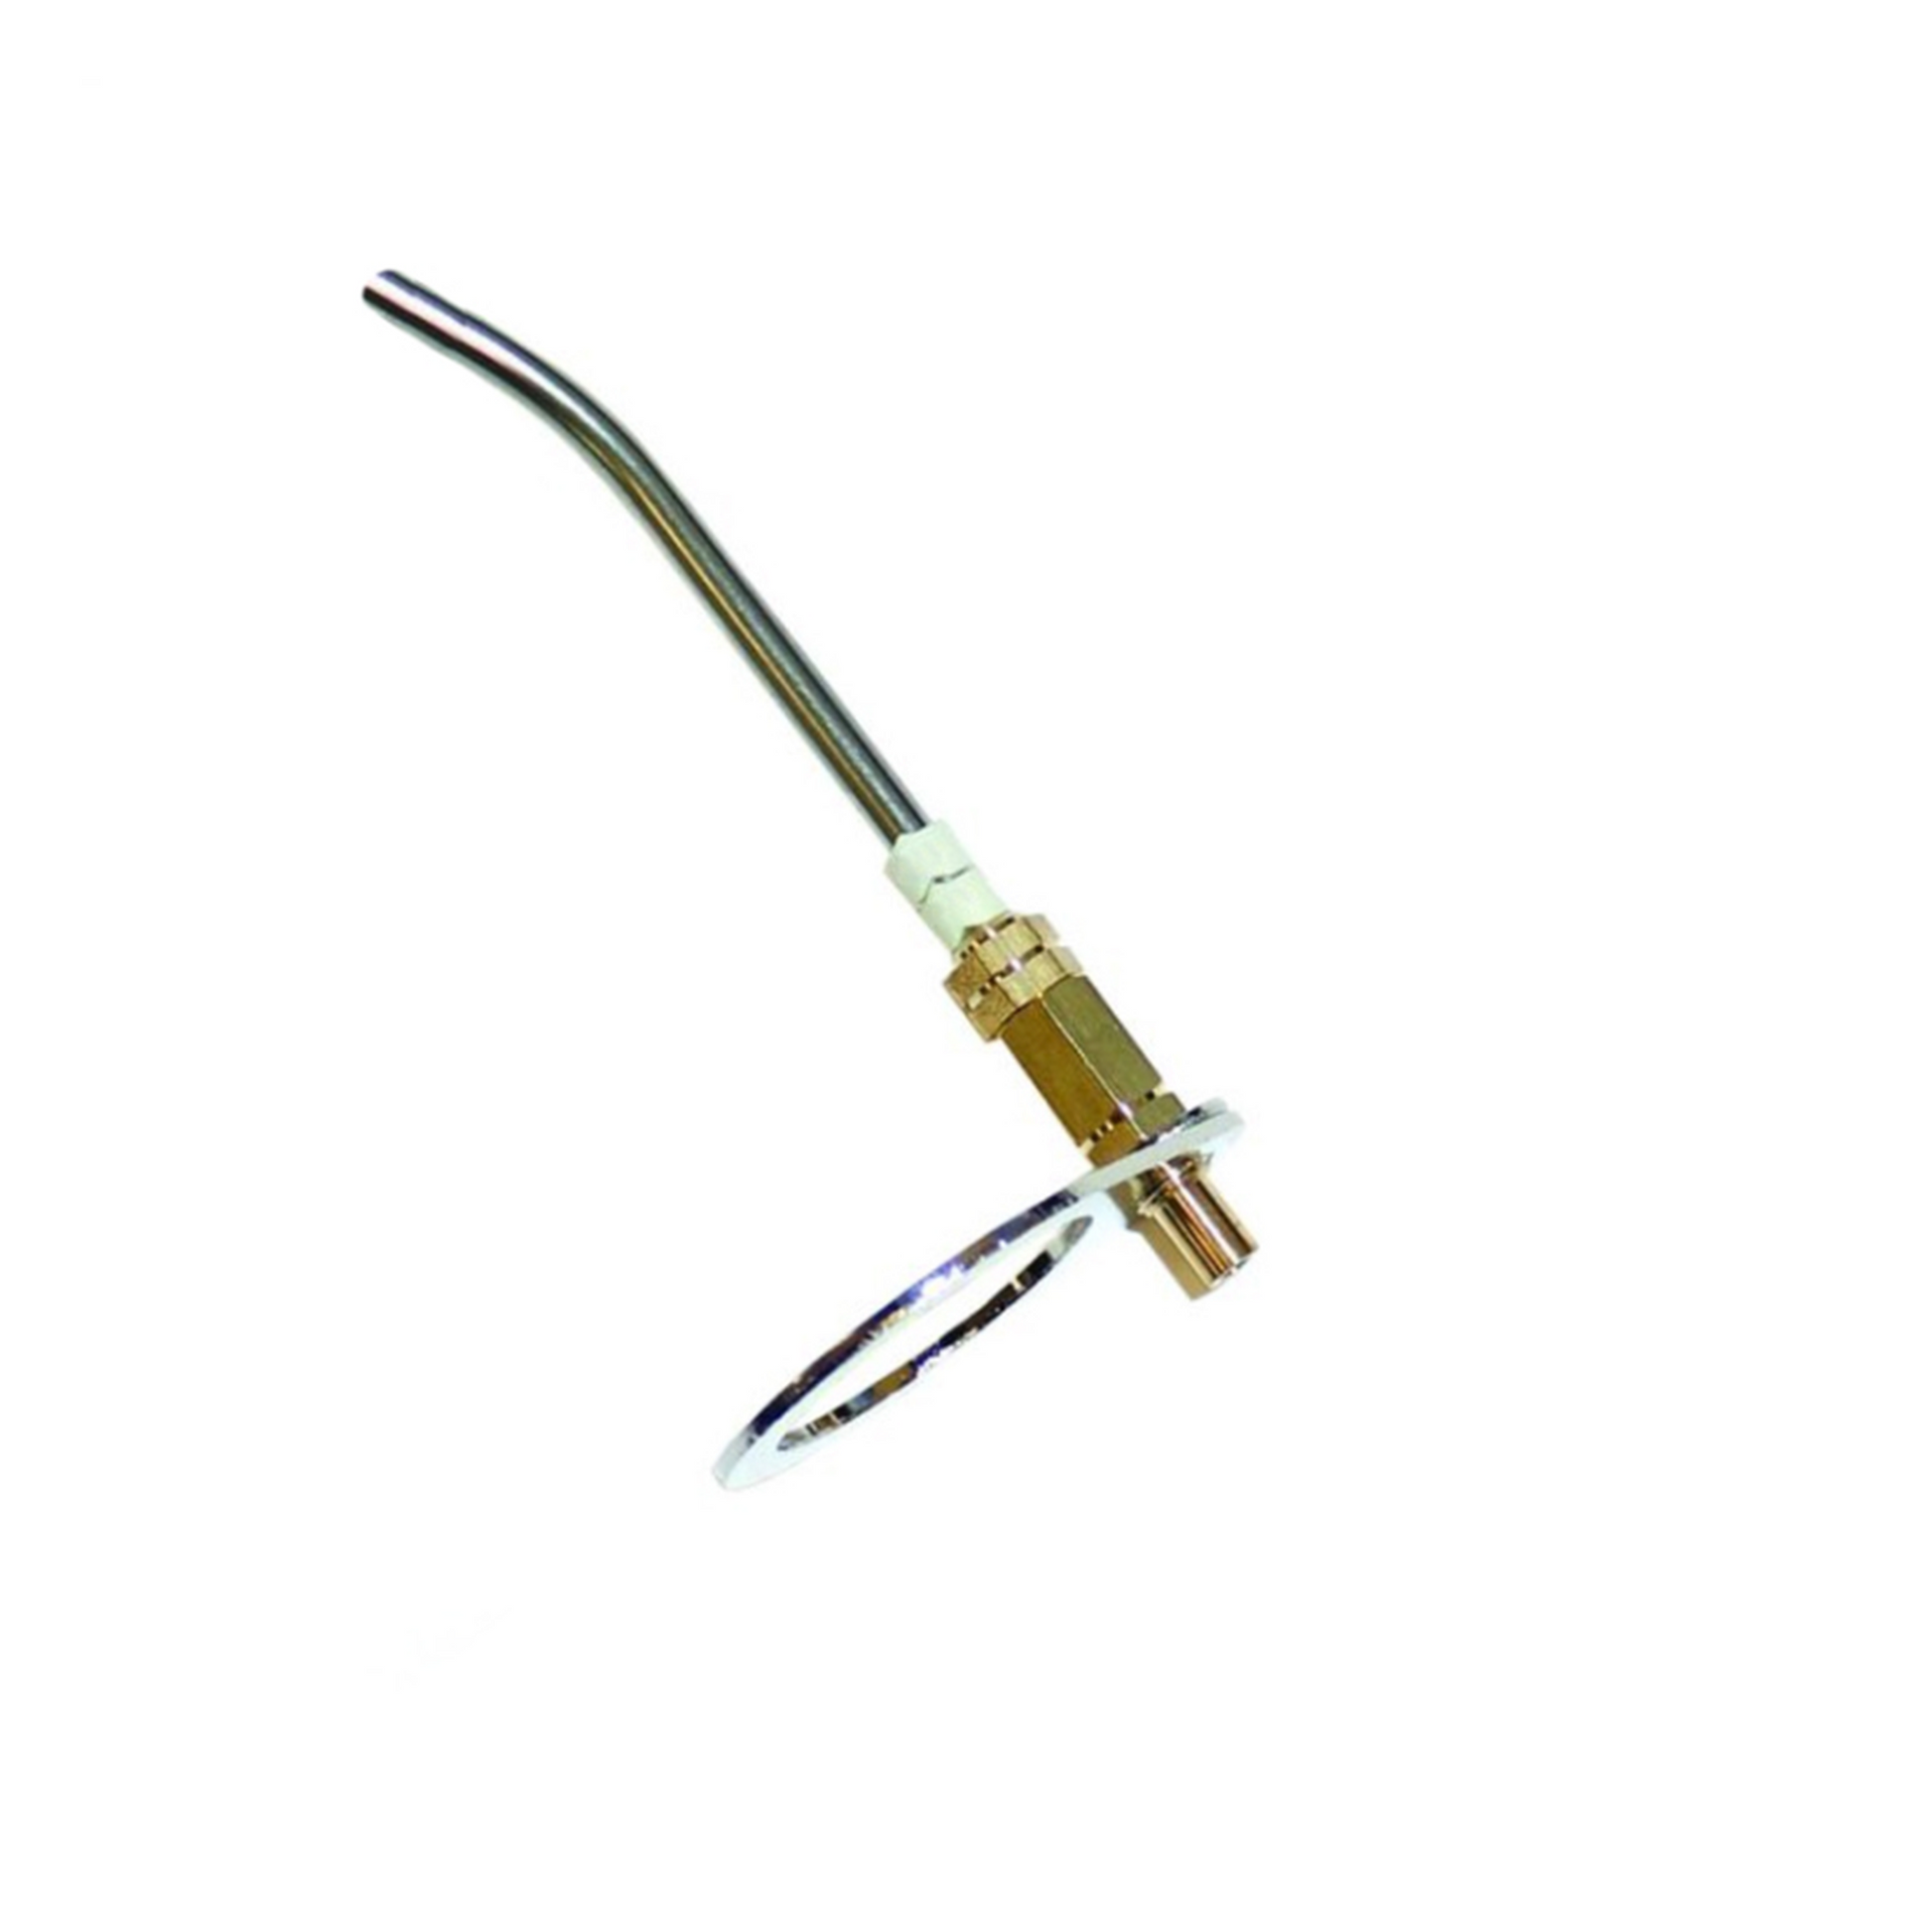 Hakko Products_ B2151 Feed pipe assembly 0.6MM_ Soldering Accessories_ Hakko Products